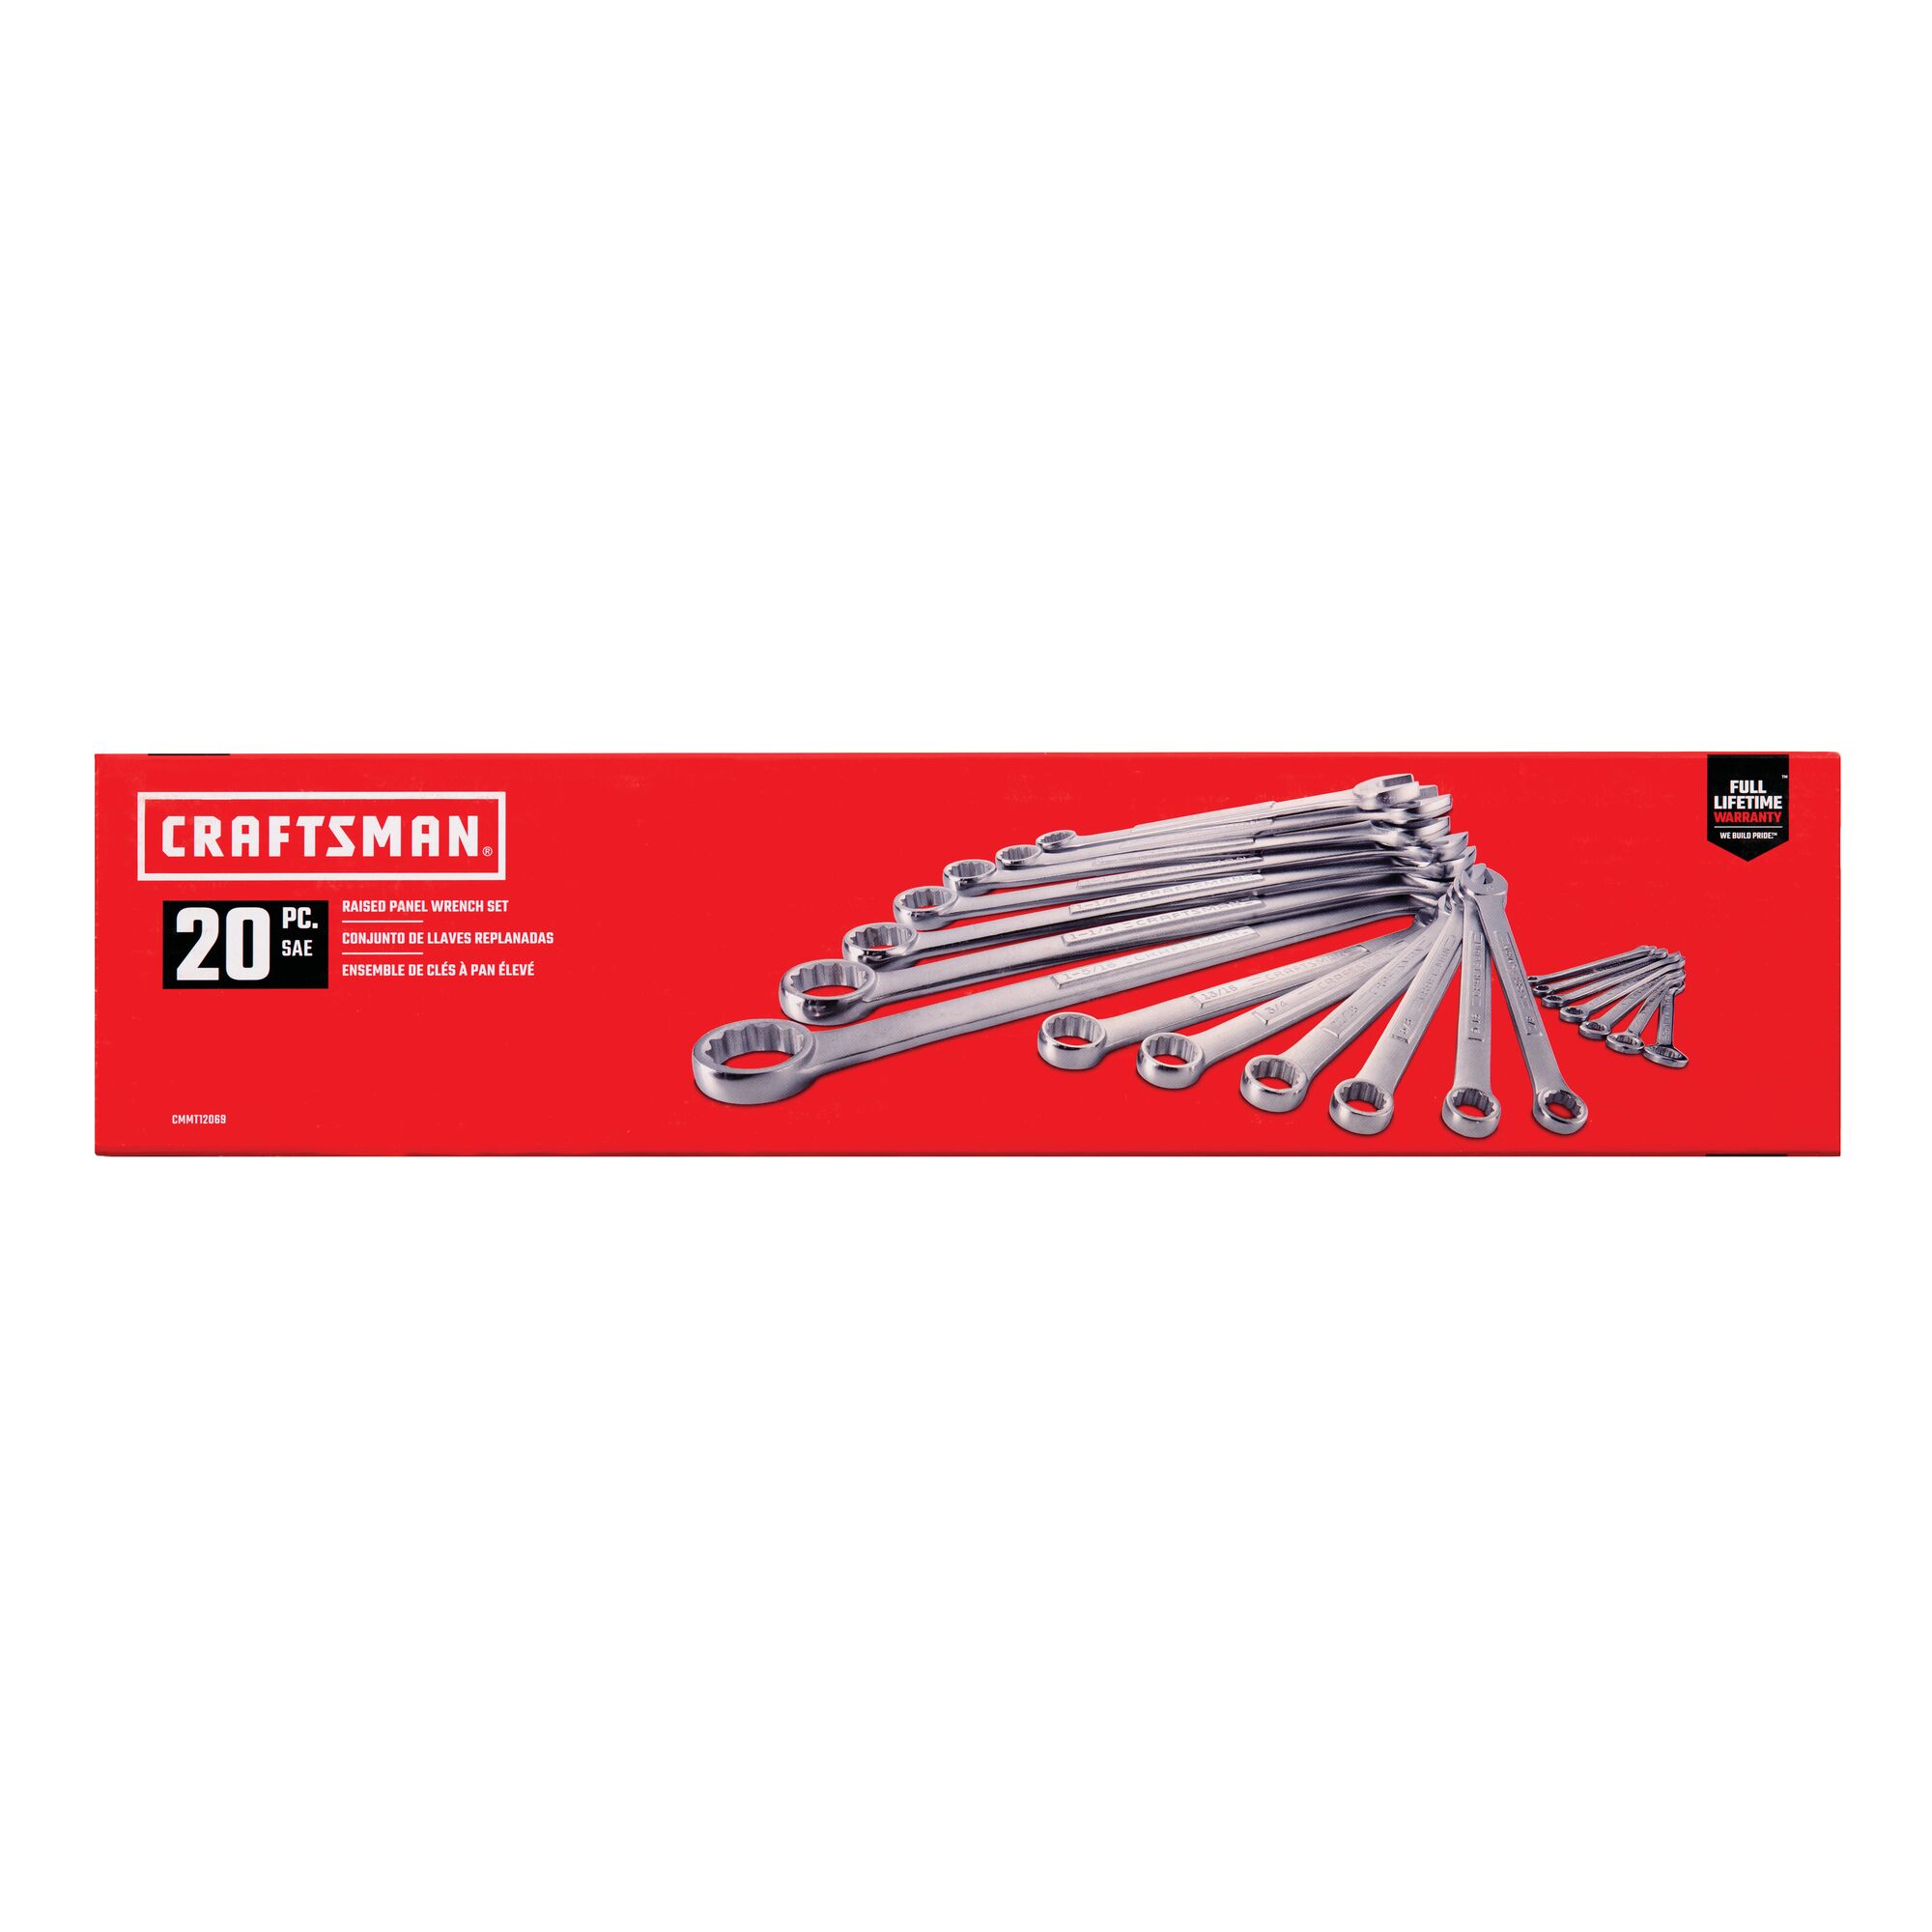 20 piece s a e combination wrench set in cardboard box.